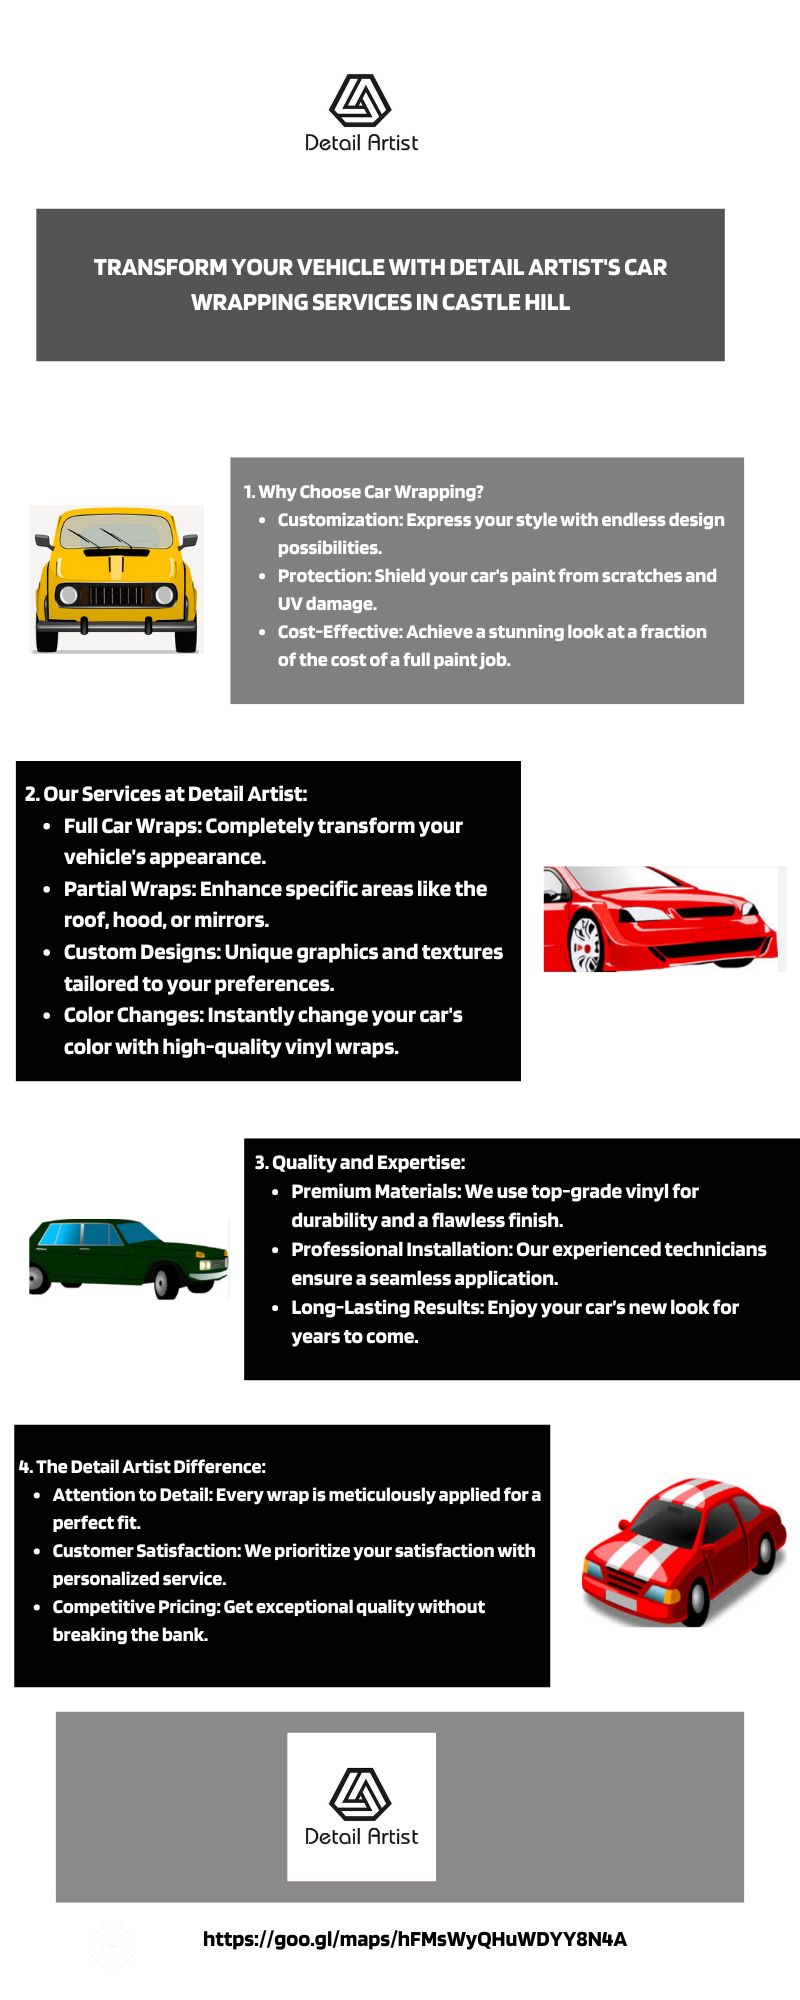 Superior Car Wrapping Services in Castle Hill - Social Social Social | Social Social Social